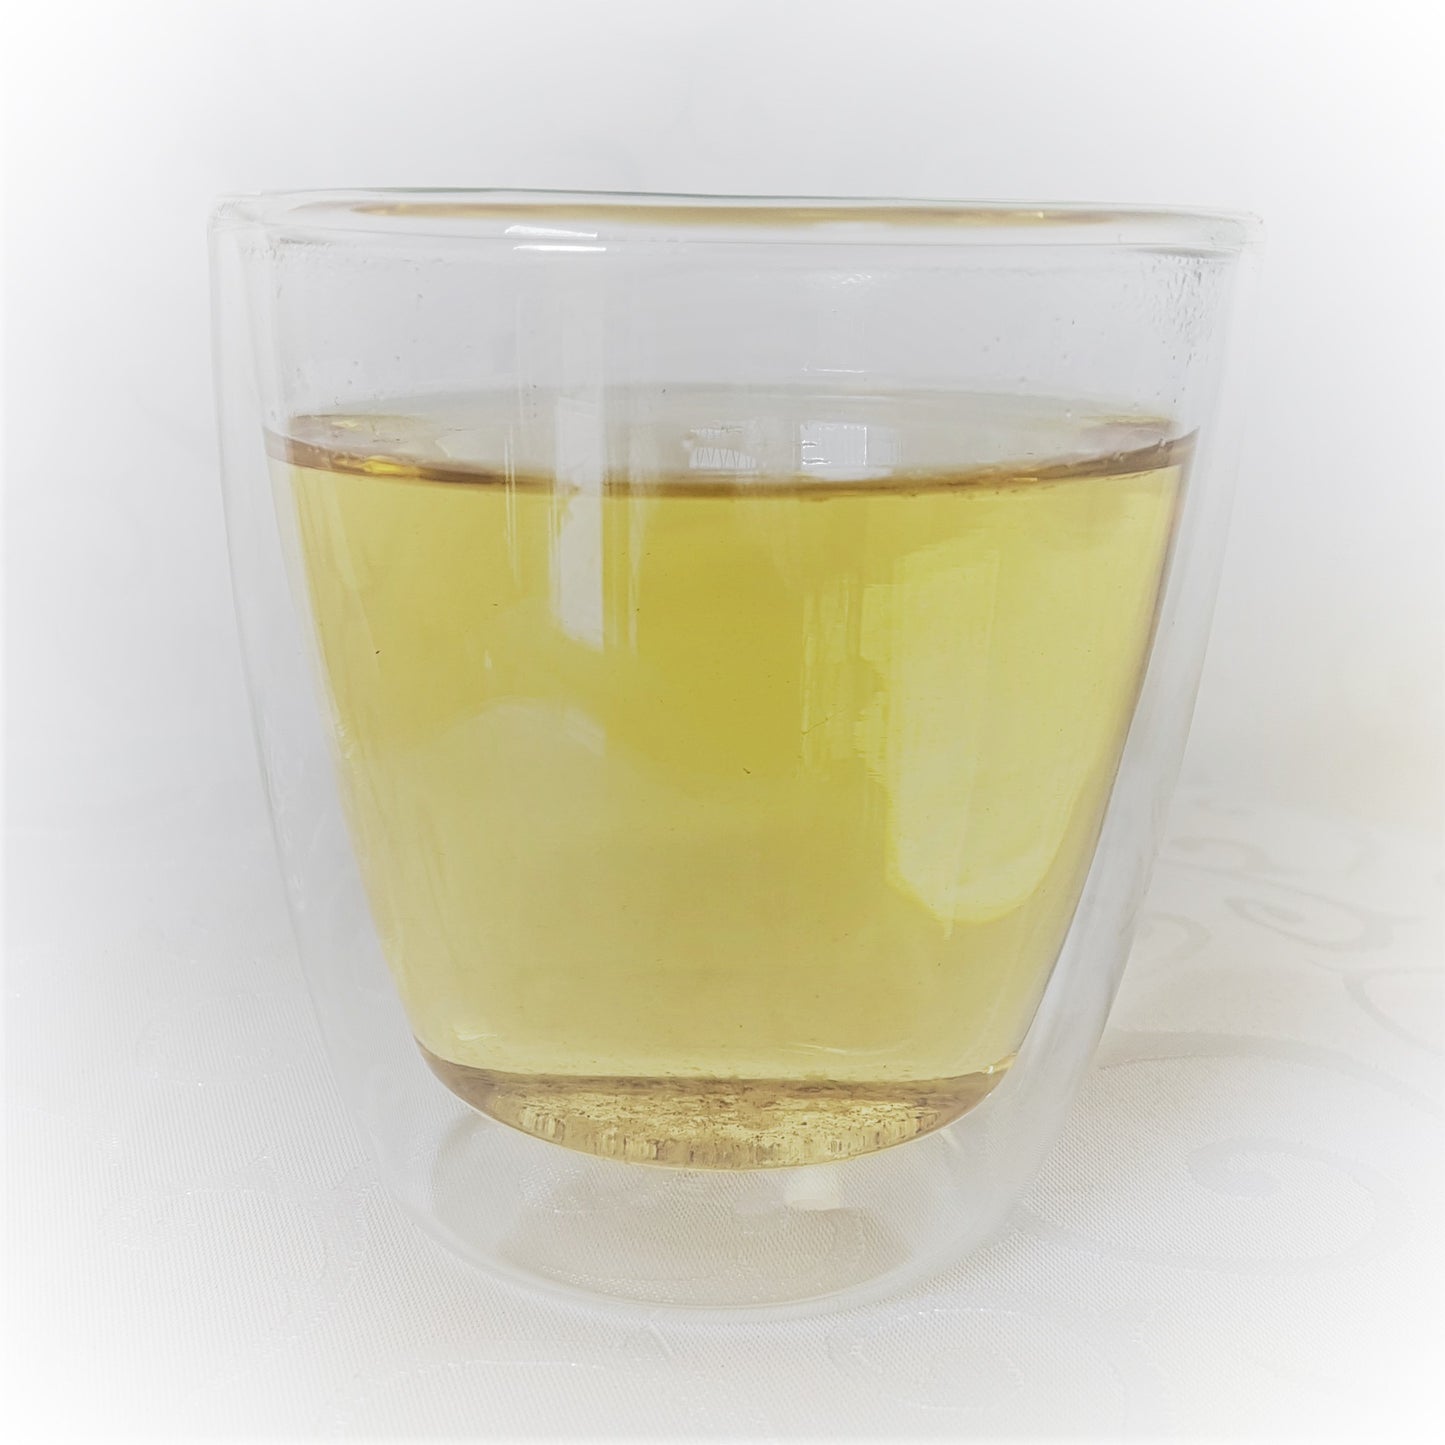 Mullein tea brew in a double walled glass.